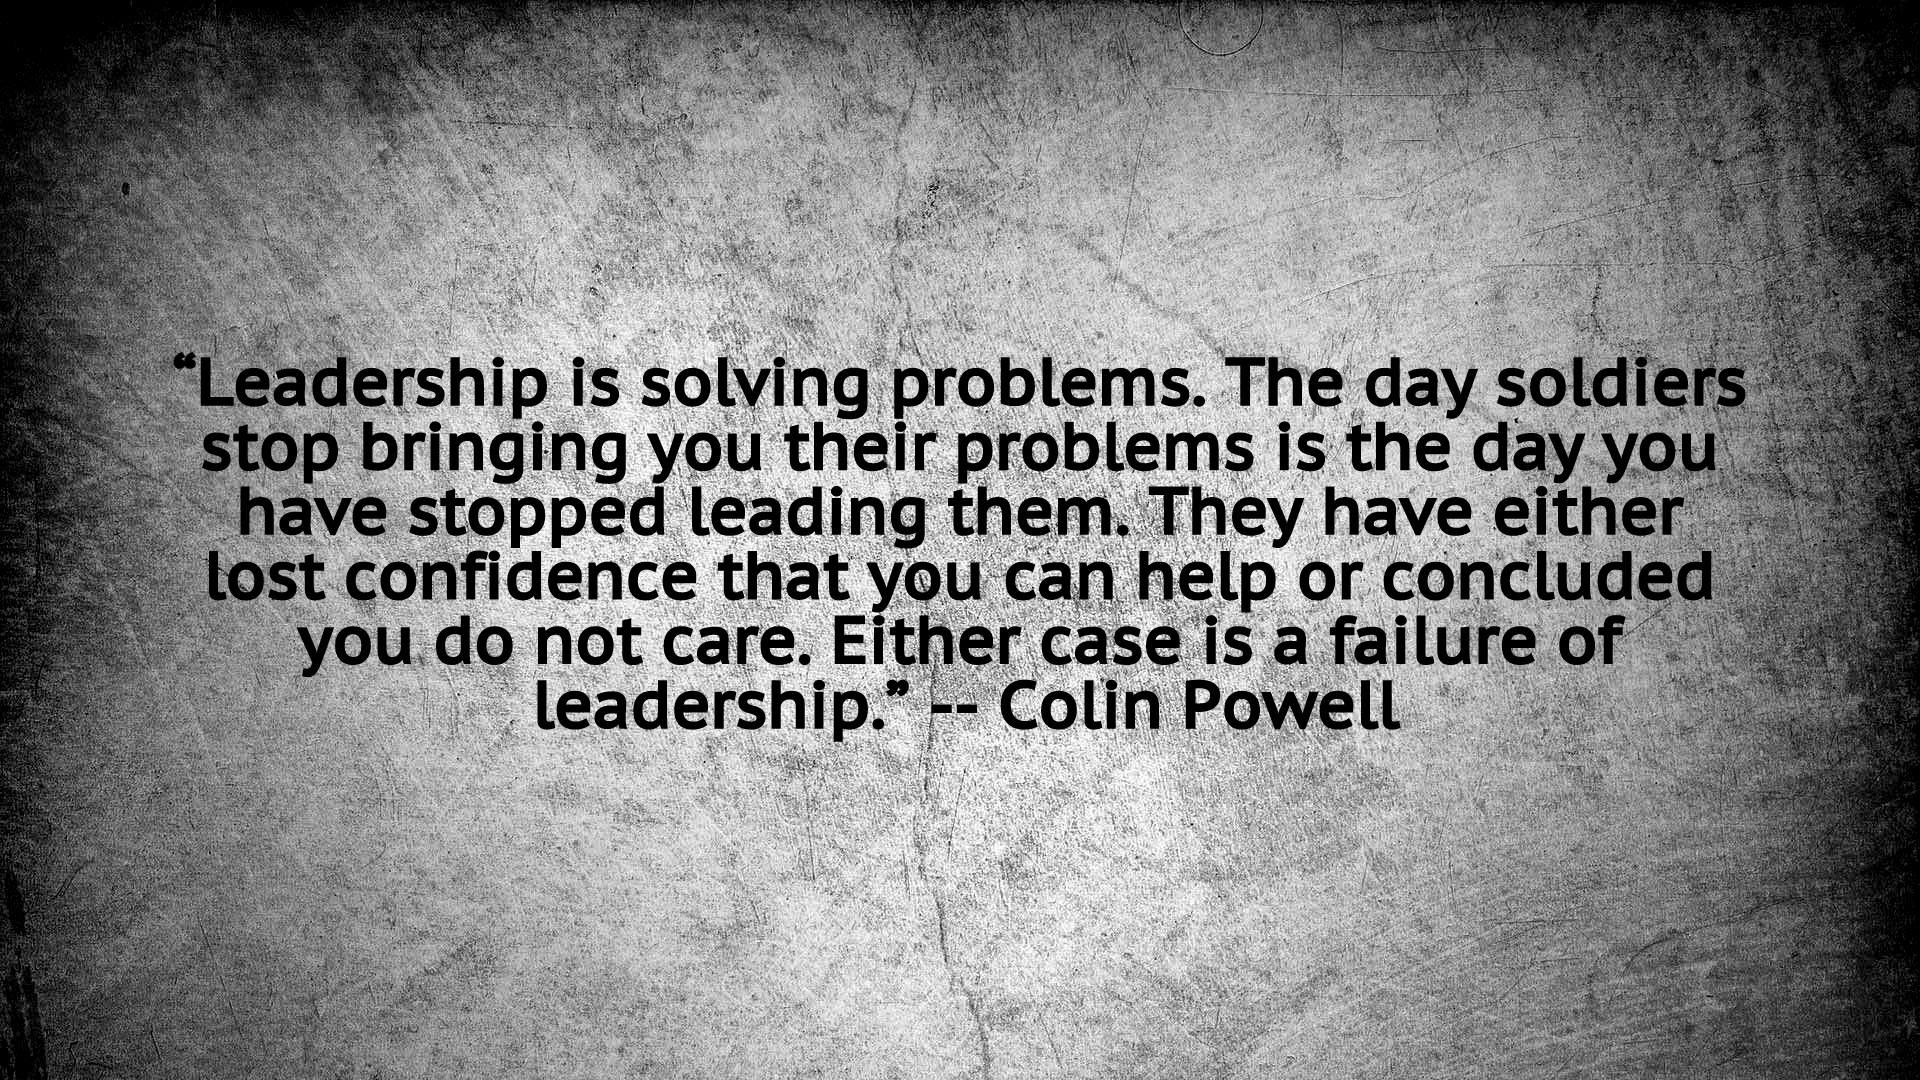 Colin Powell Quote Leadership
 inspiration